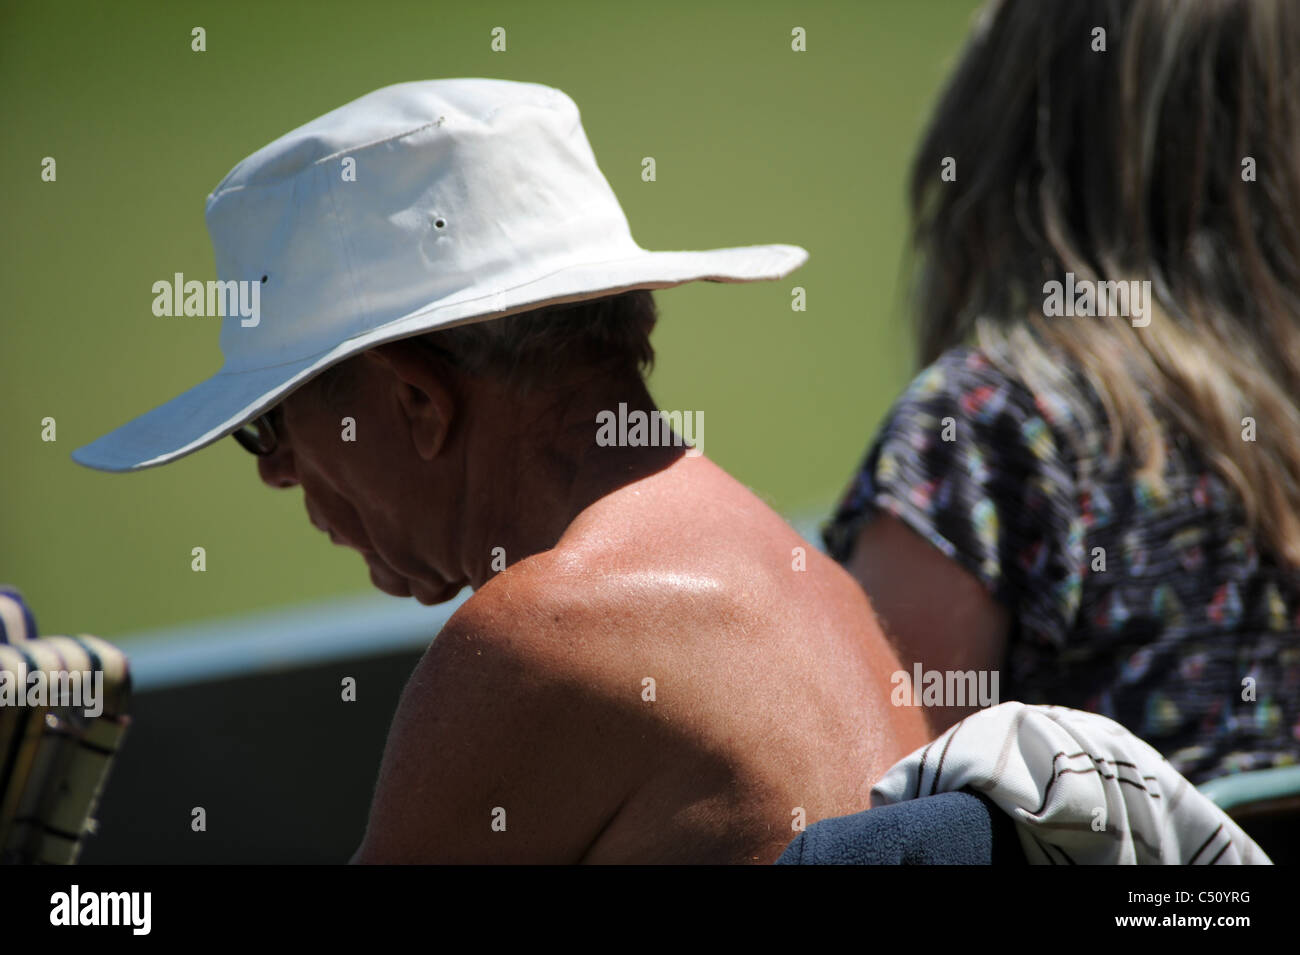 Man watching cricket with his shirt off getting sunburnt on shoulders UK Stock Photo